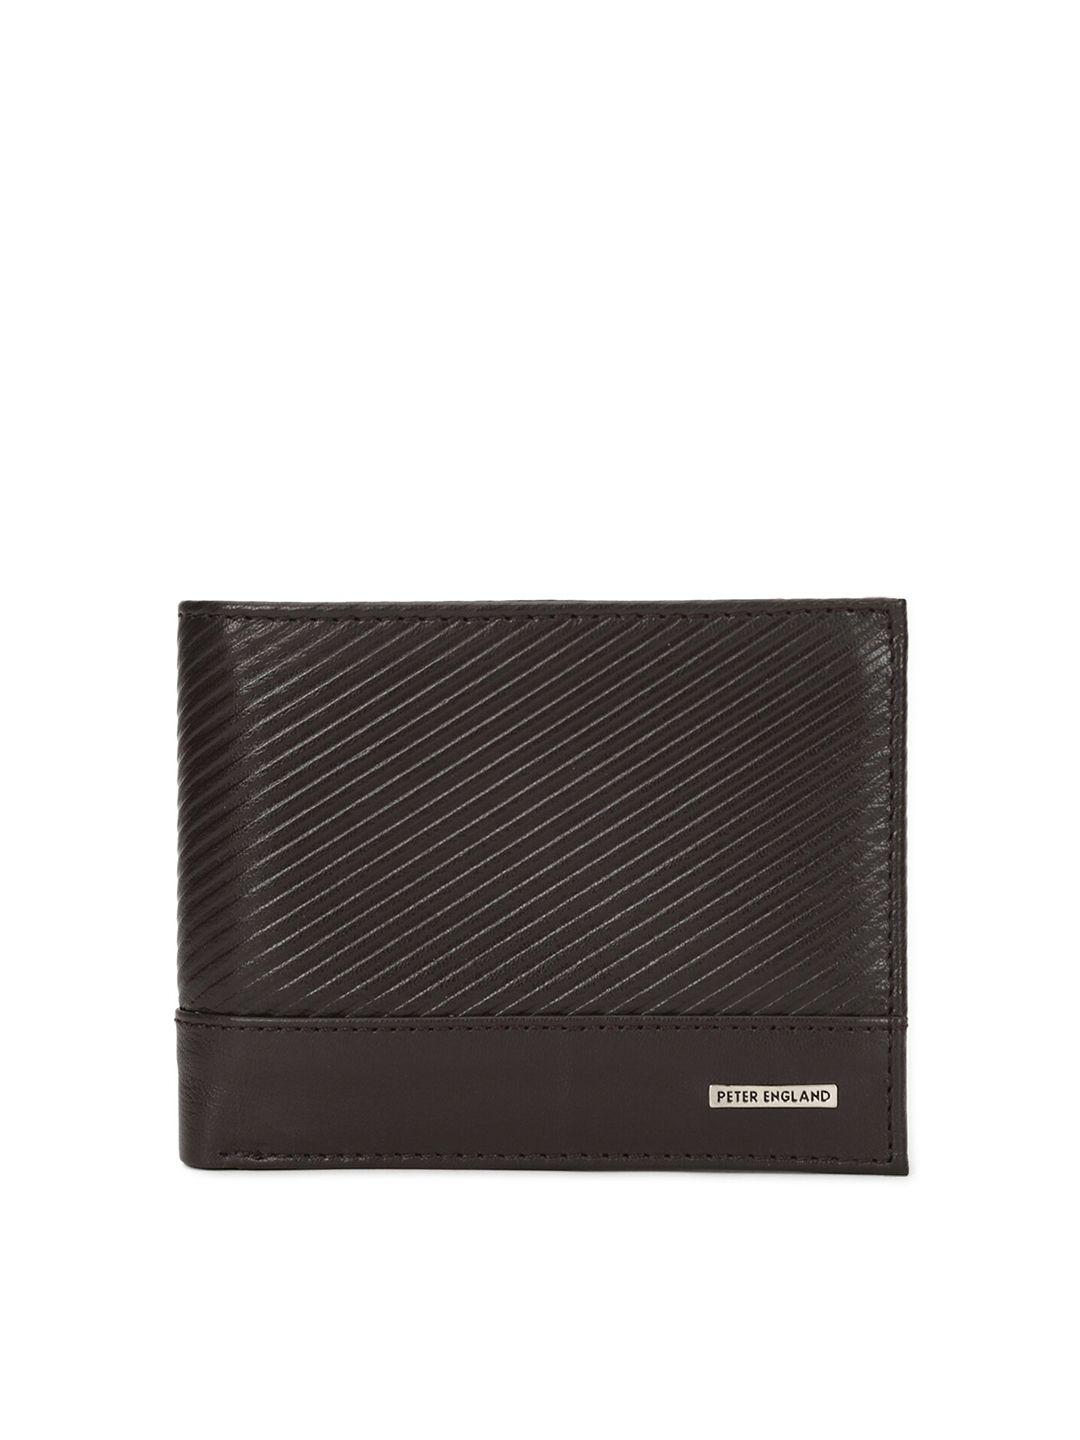 peter-england-men-brown-textured-leather-two-fold-wallet